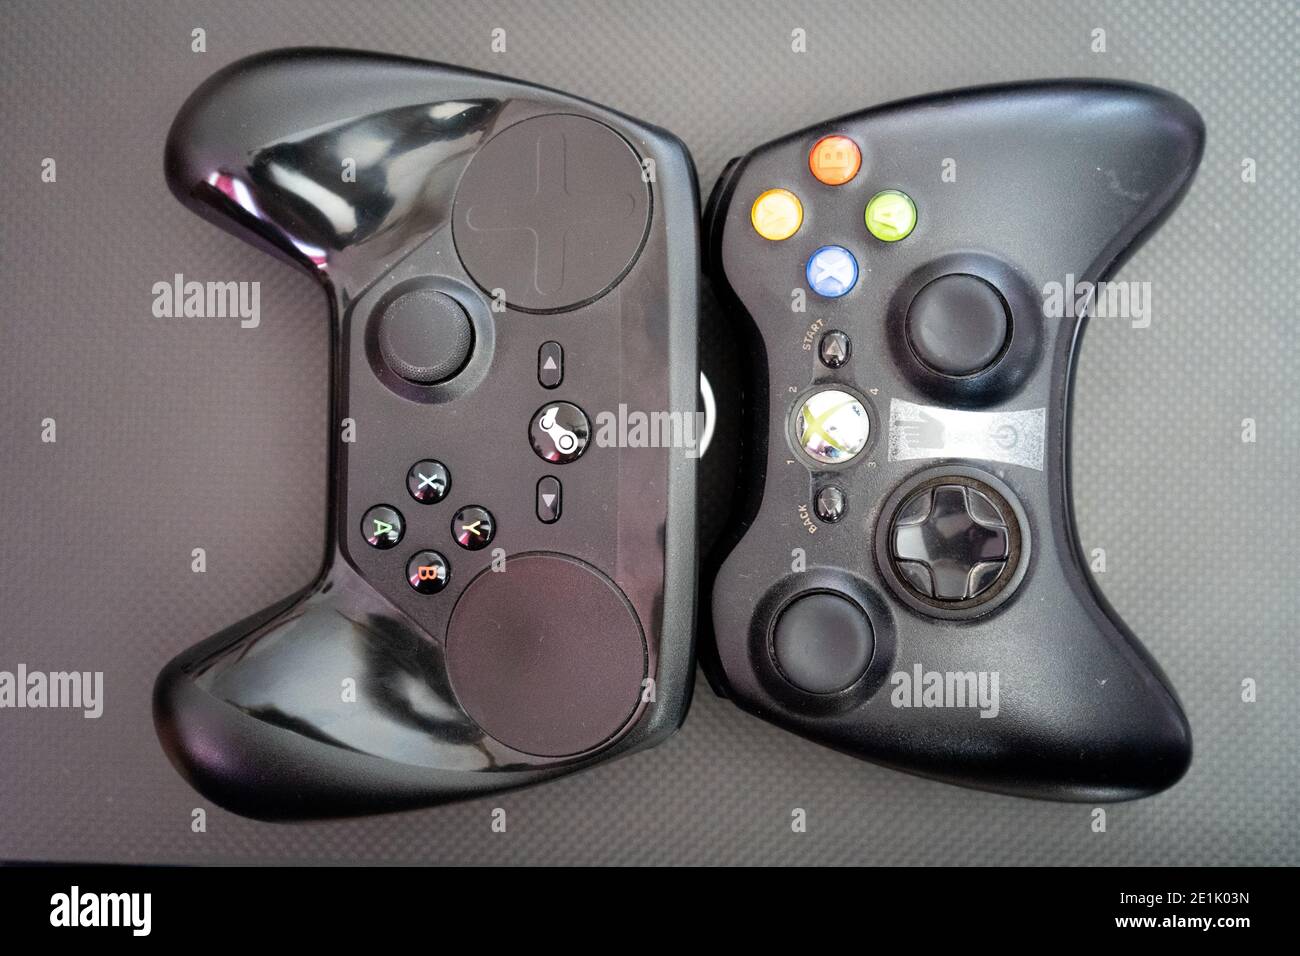 Xbox vs the steam controller on a carbon fiber background showing  technology of inputs for computer gaming Stock Photo - Alamy